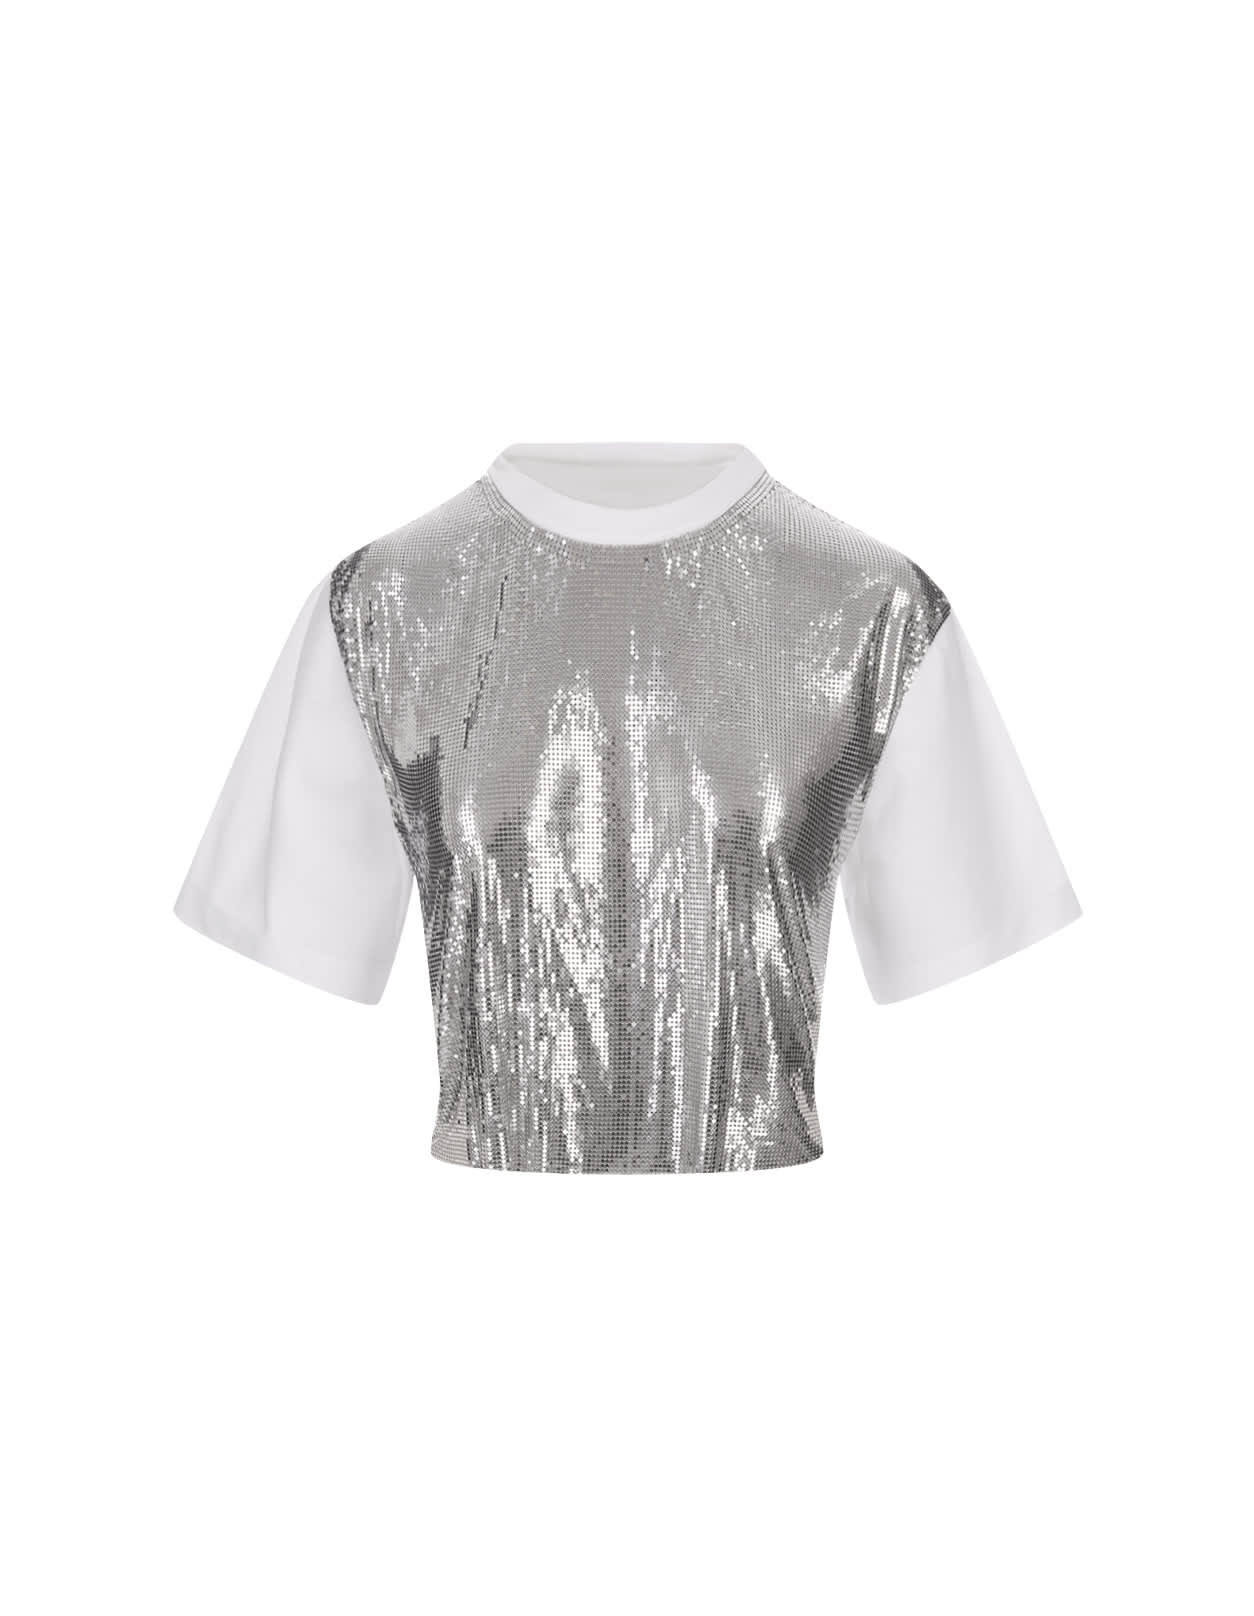 White Short T-shirt With Silver Mesh Panel